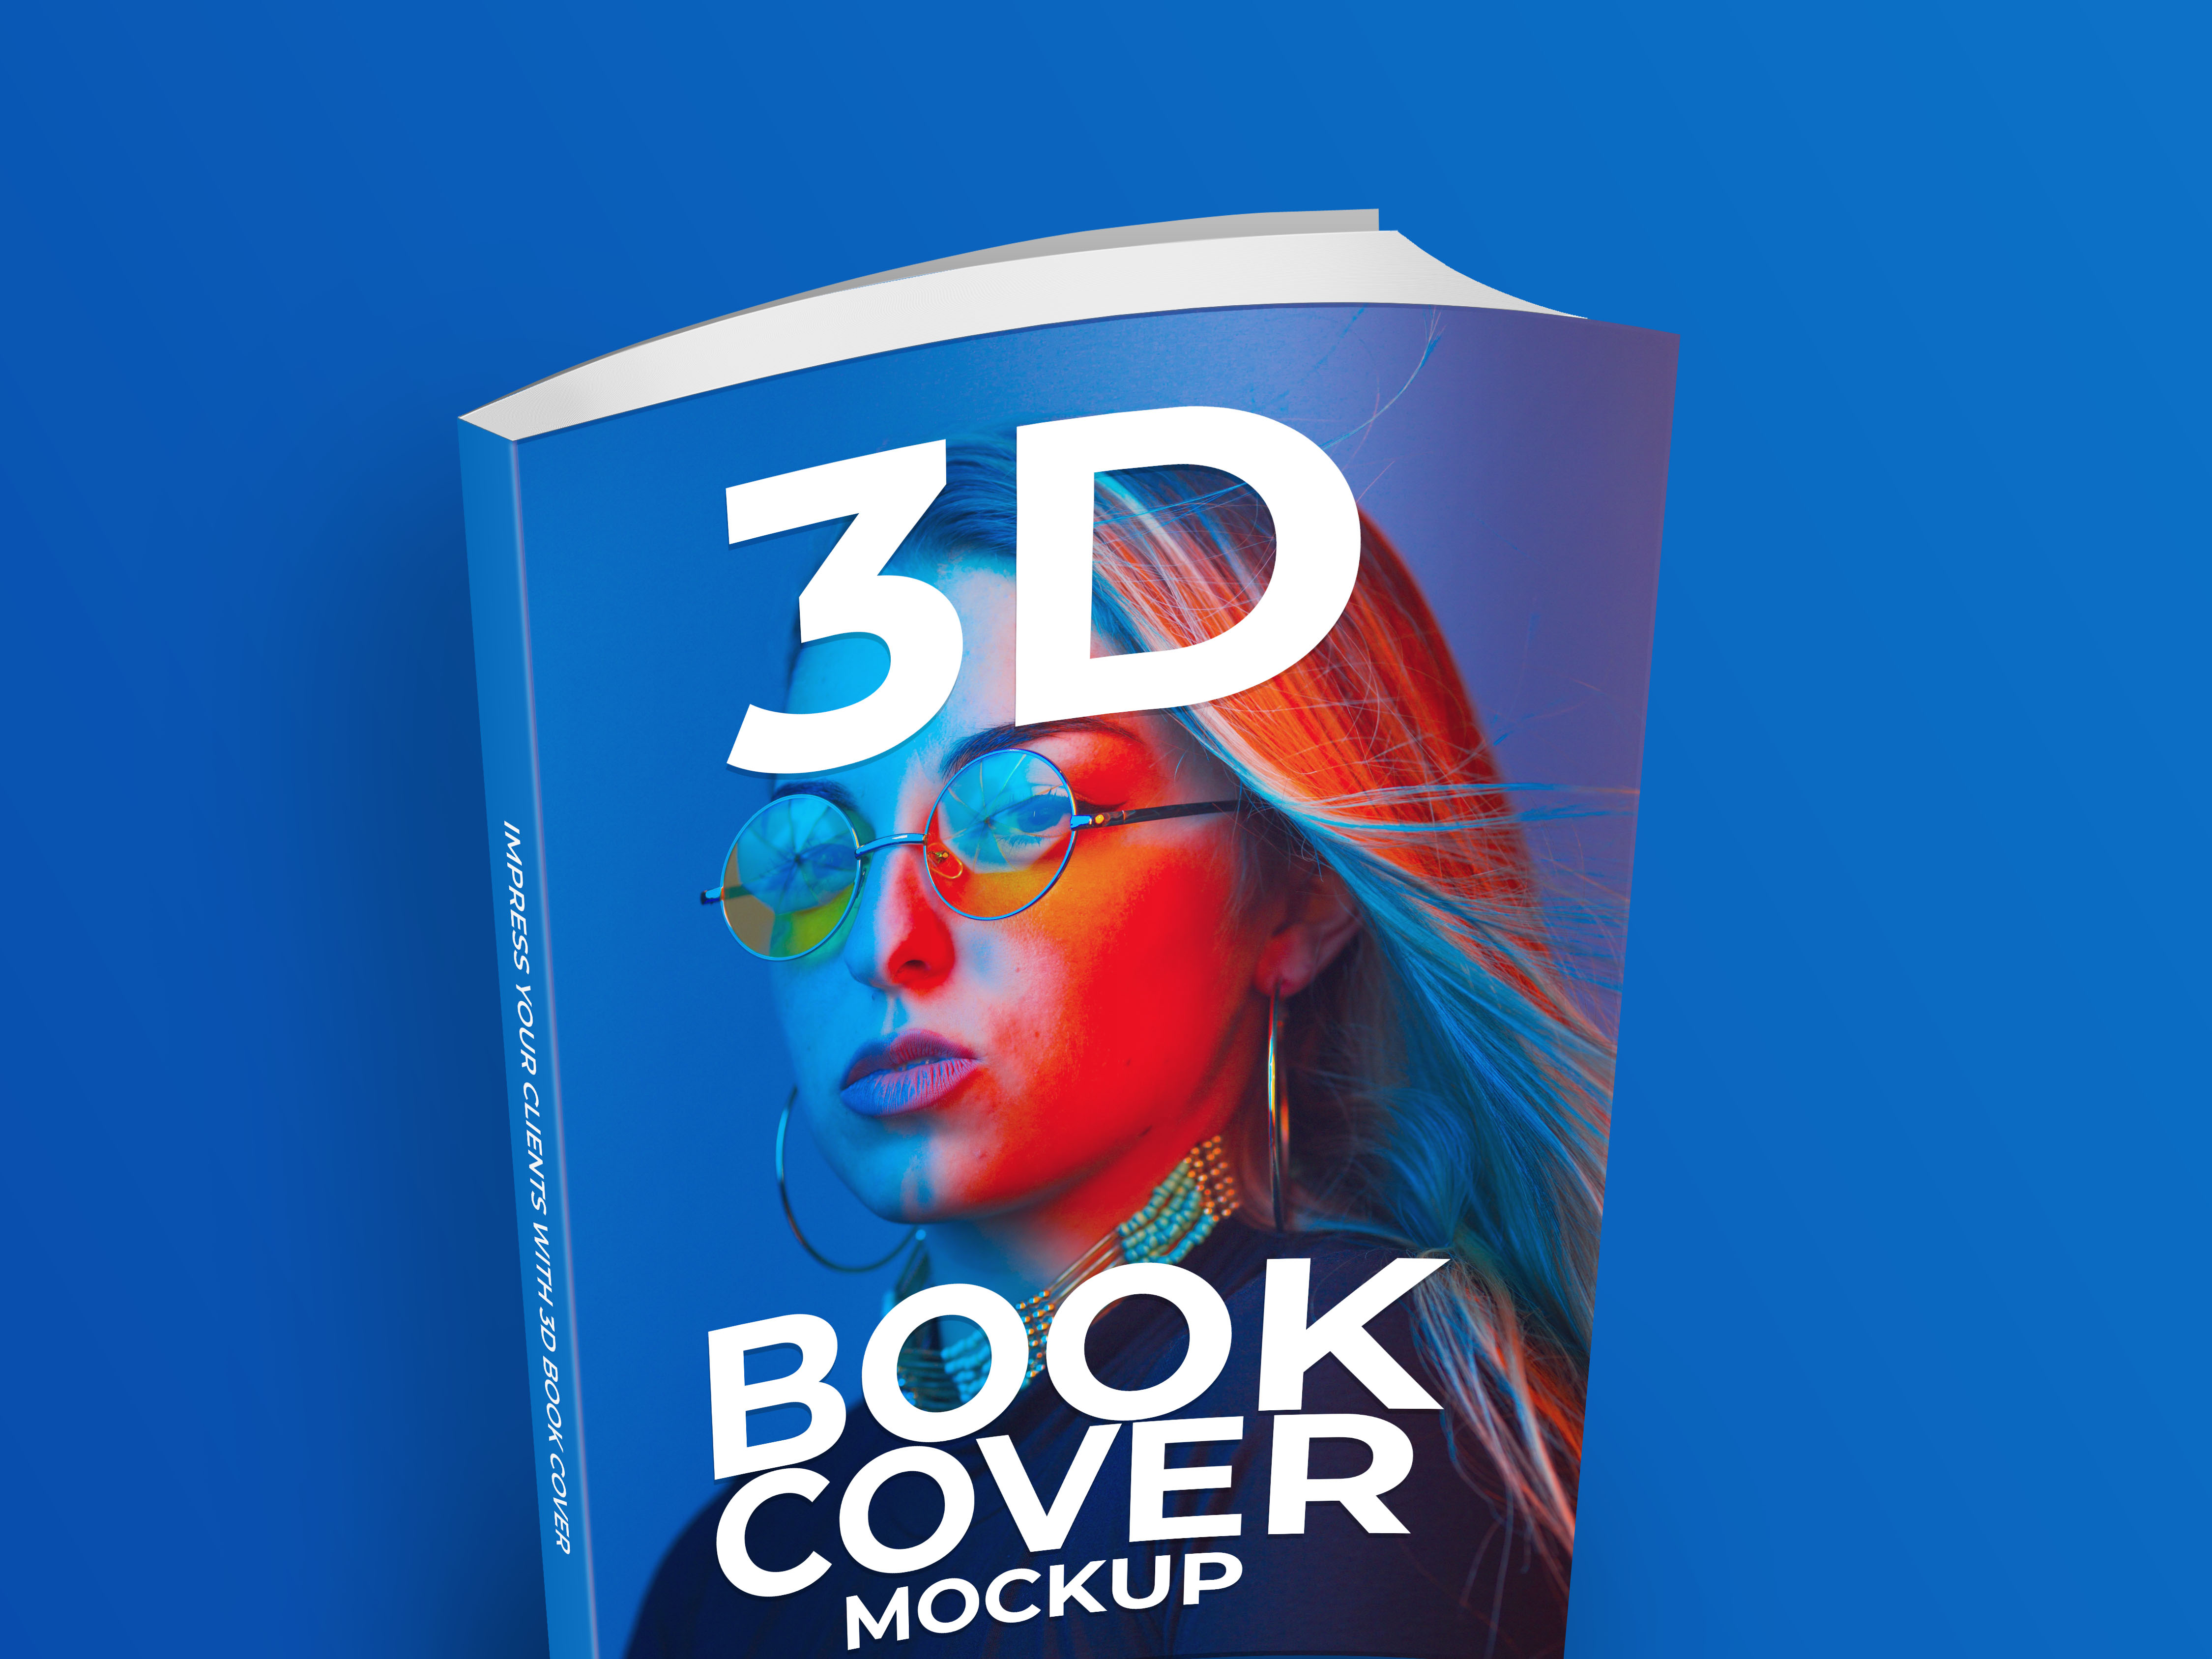 Download 3d Book Cover Mockup Free Psd Download by Aleena Cooley on Dribbble